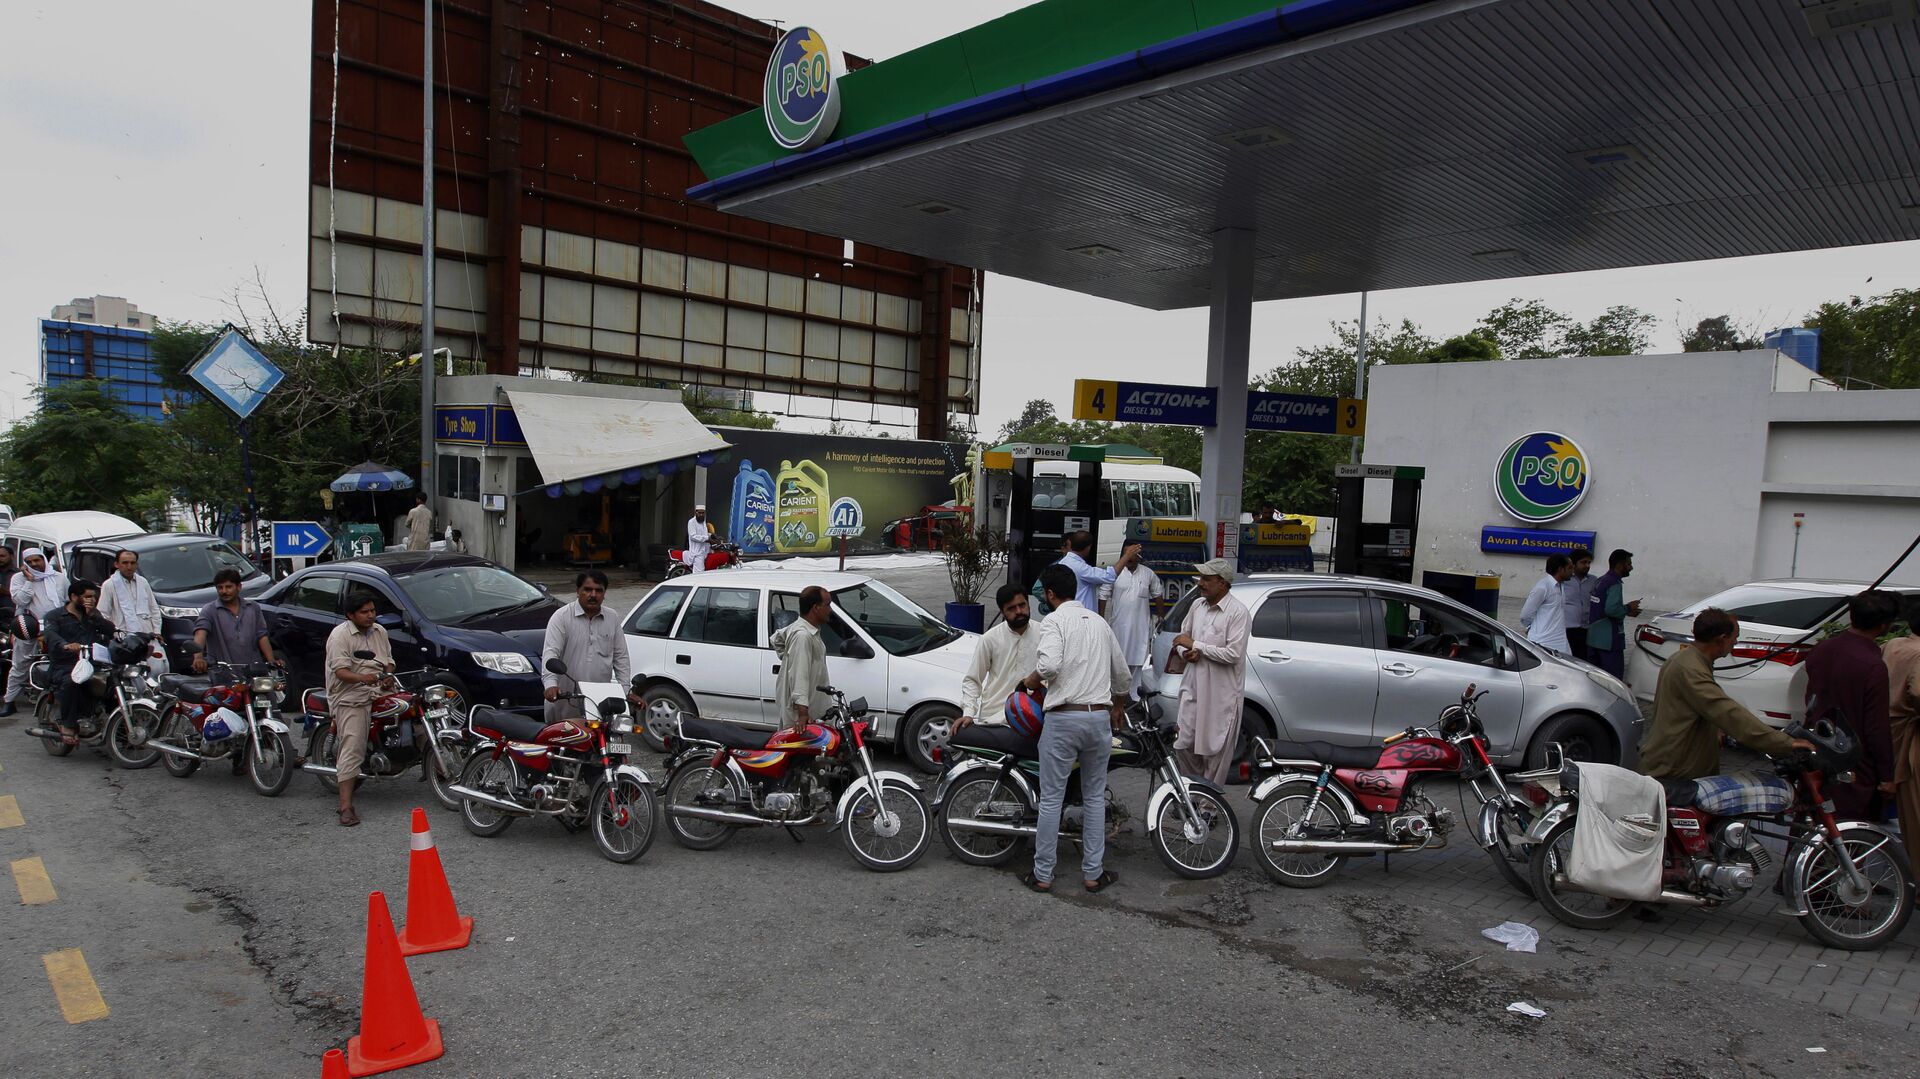 Motorcyclists and vehicles stand in long queue for fuel, which is short due to an oil tankers strike at a fuel station in Islamabad, Pakistan, Wednesday, July 26, 2017 - Sputnik International, 1920, 27.05.2022